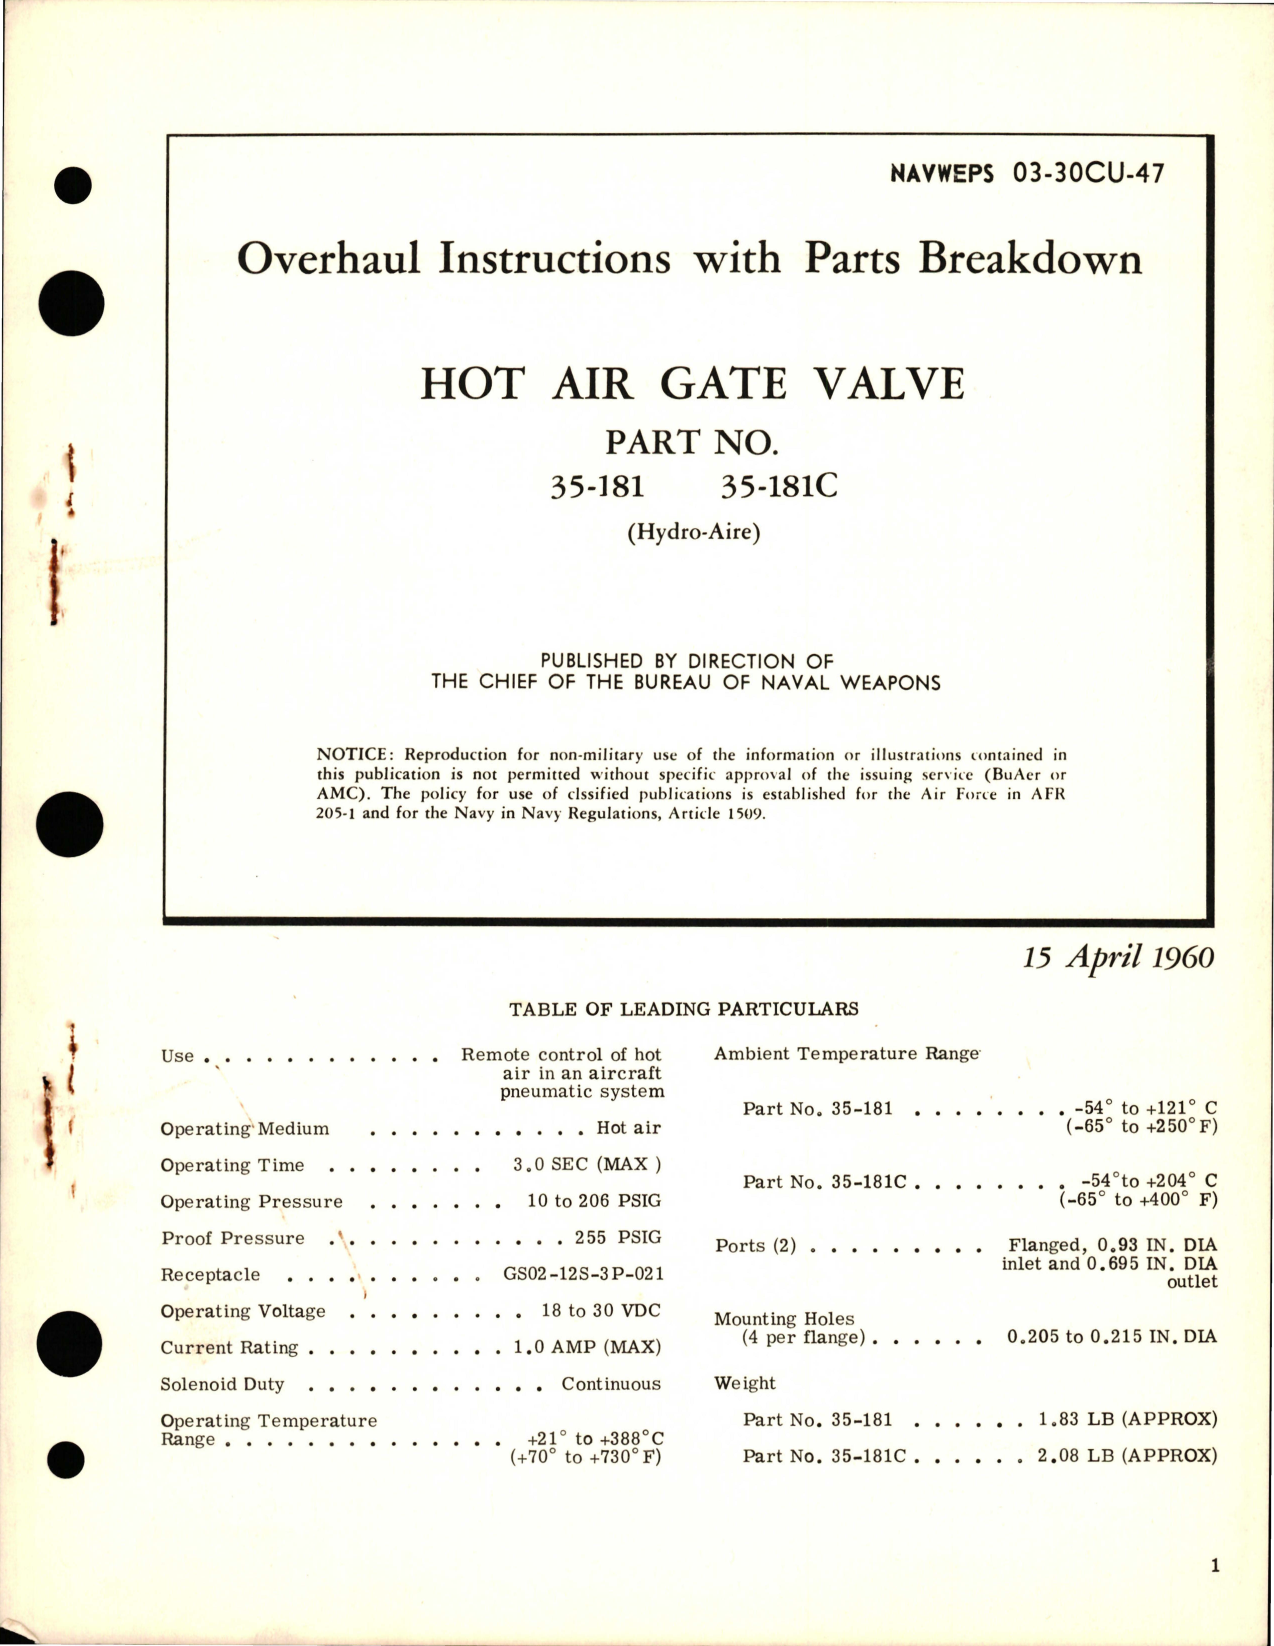 Sample page 1 from AirCorps Library document: Overhaul Instructions with Parts Breakdown for Hot Air Gate Valve - Part 35-181, 35-181C